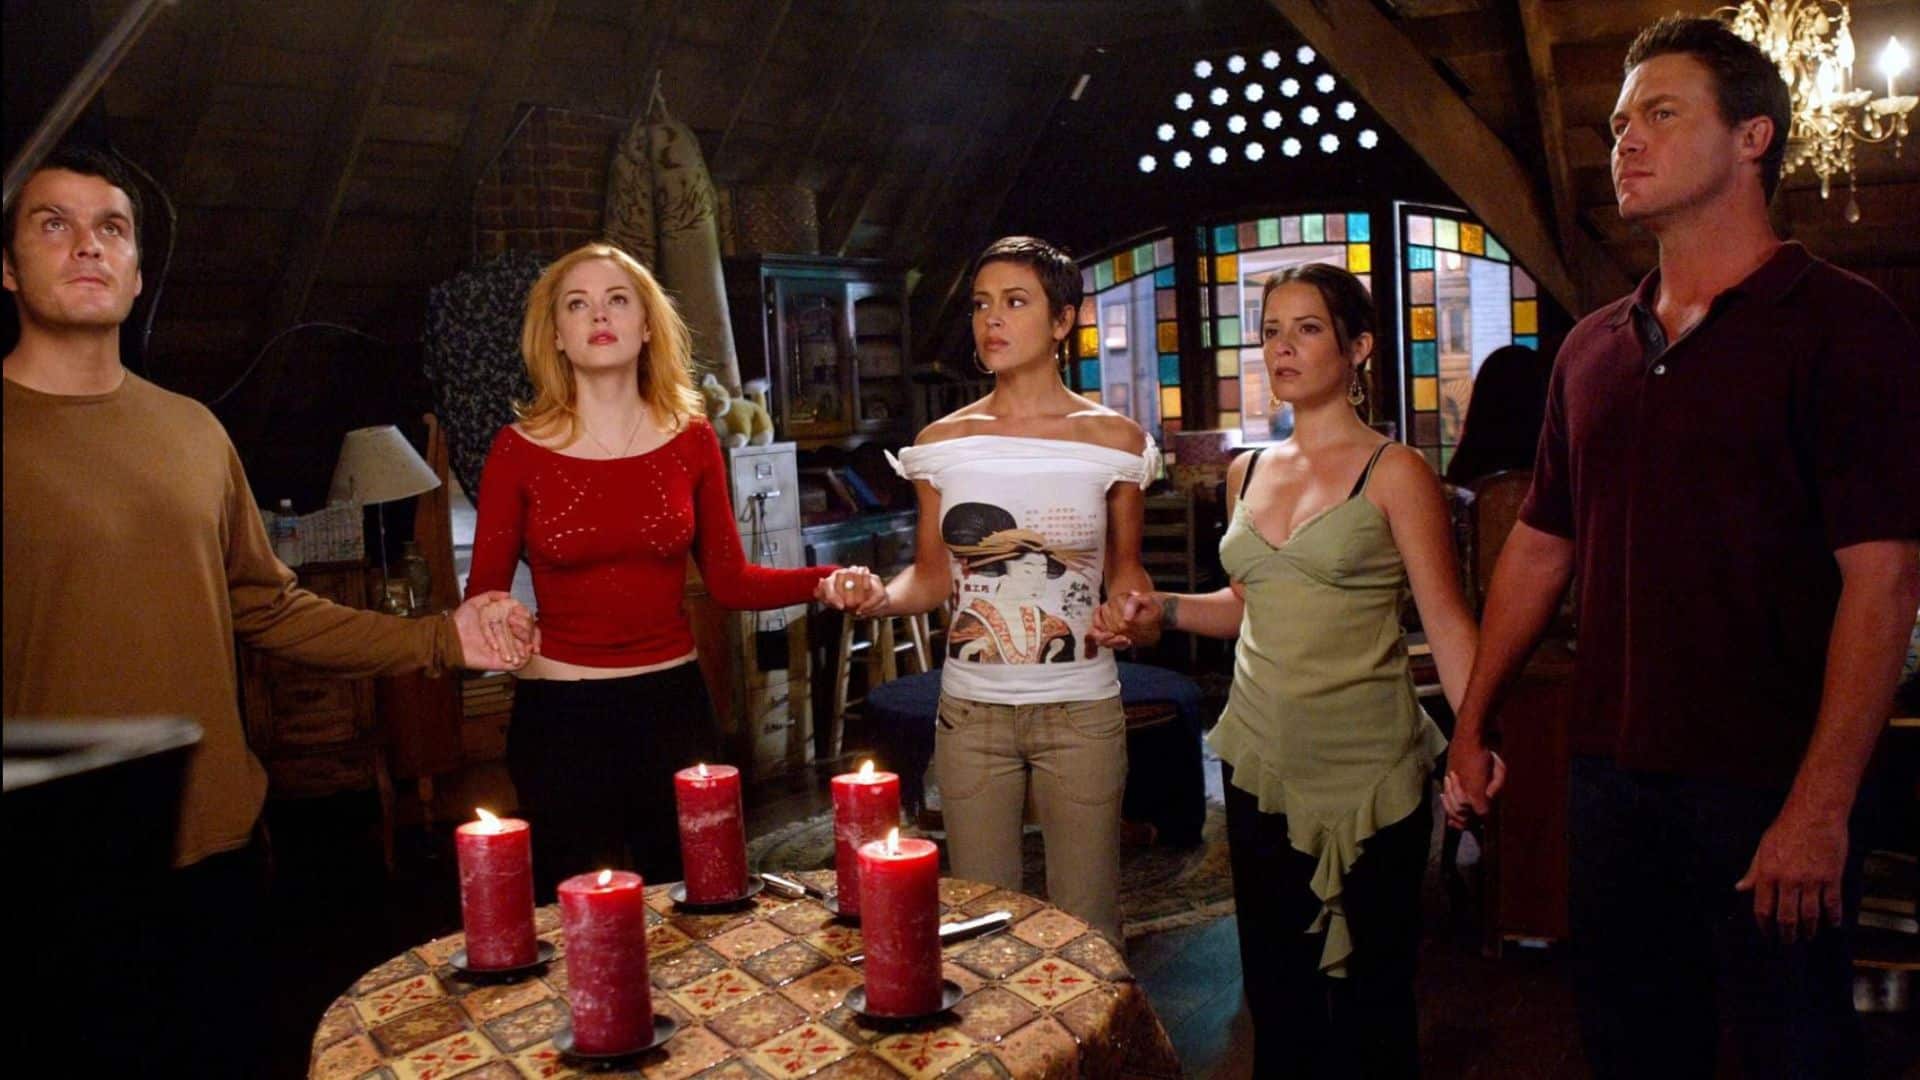 Richard Montana, Paige Matthews, Phoebe Halliwell, Piper Halliwell, and Leo Wyatt cast a spell in this image from Hulu.